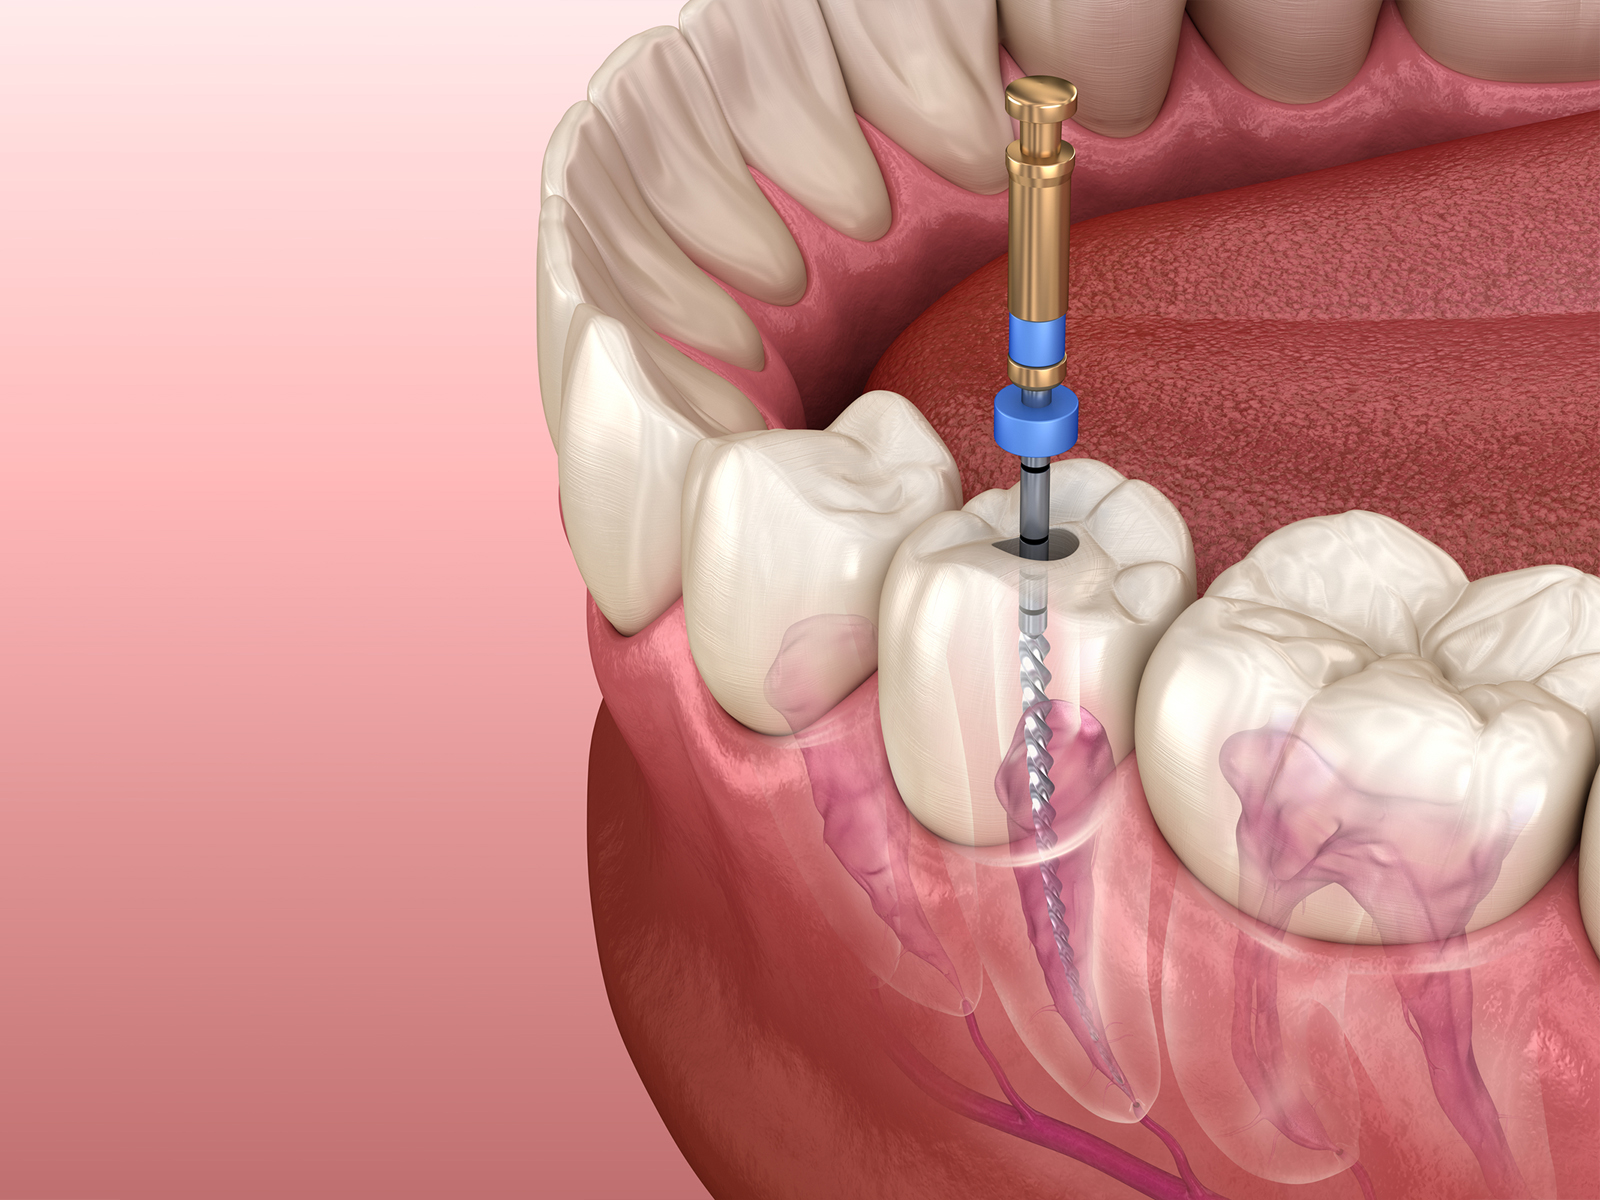 What should I avoid after a root canal?